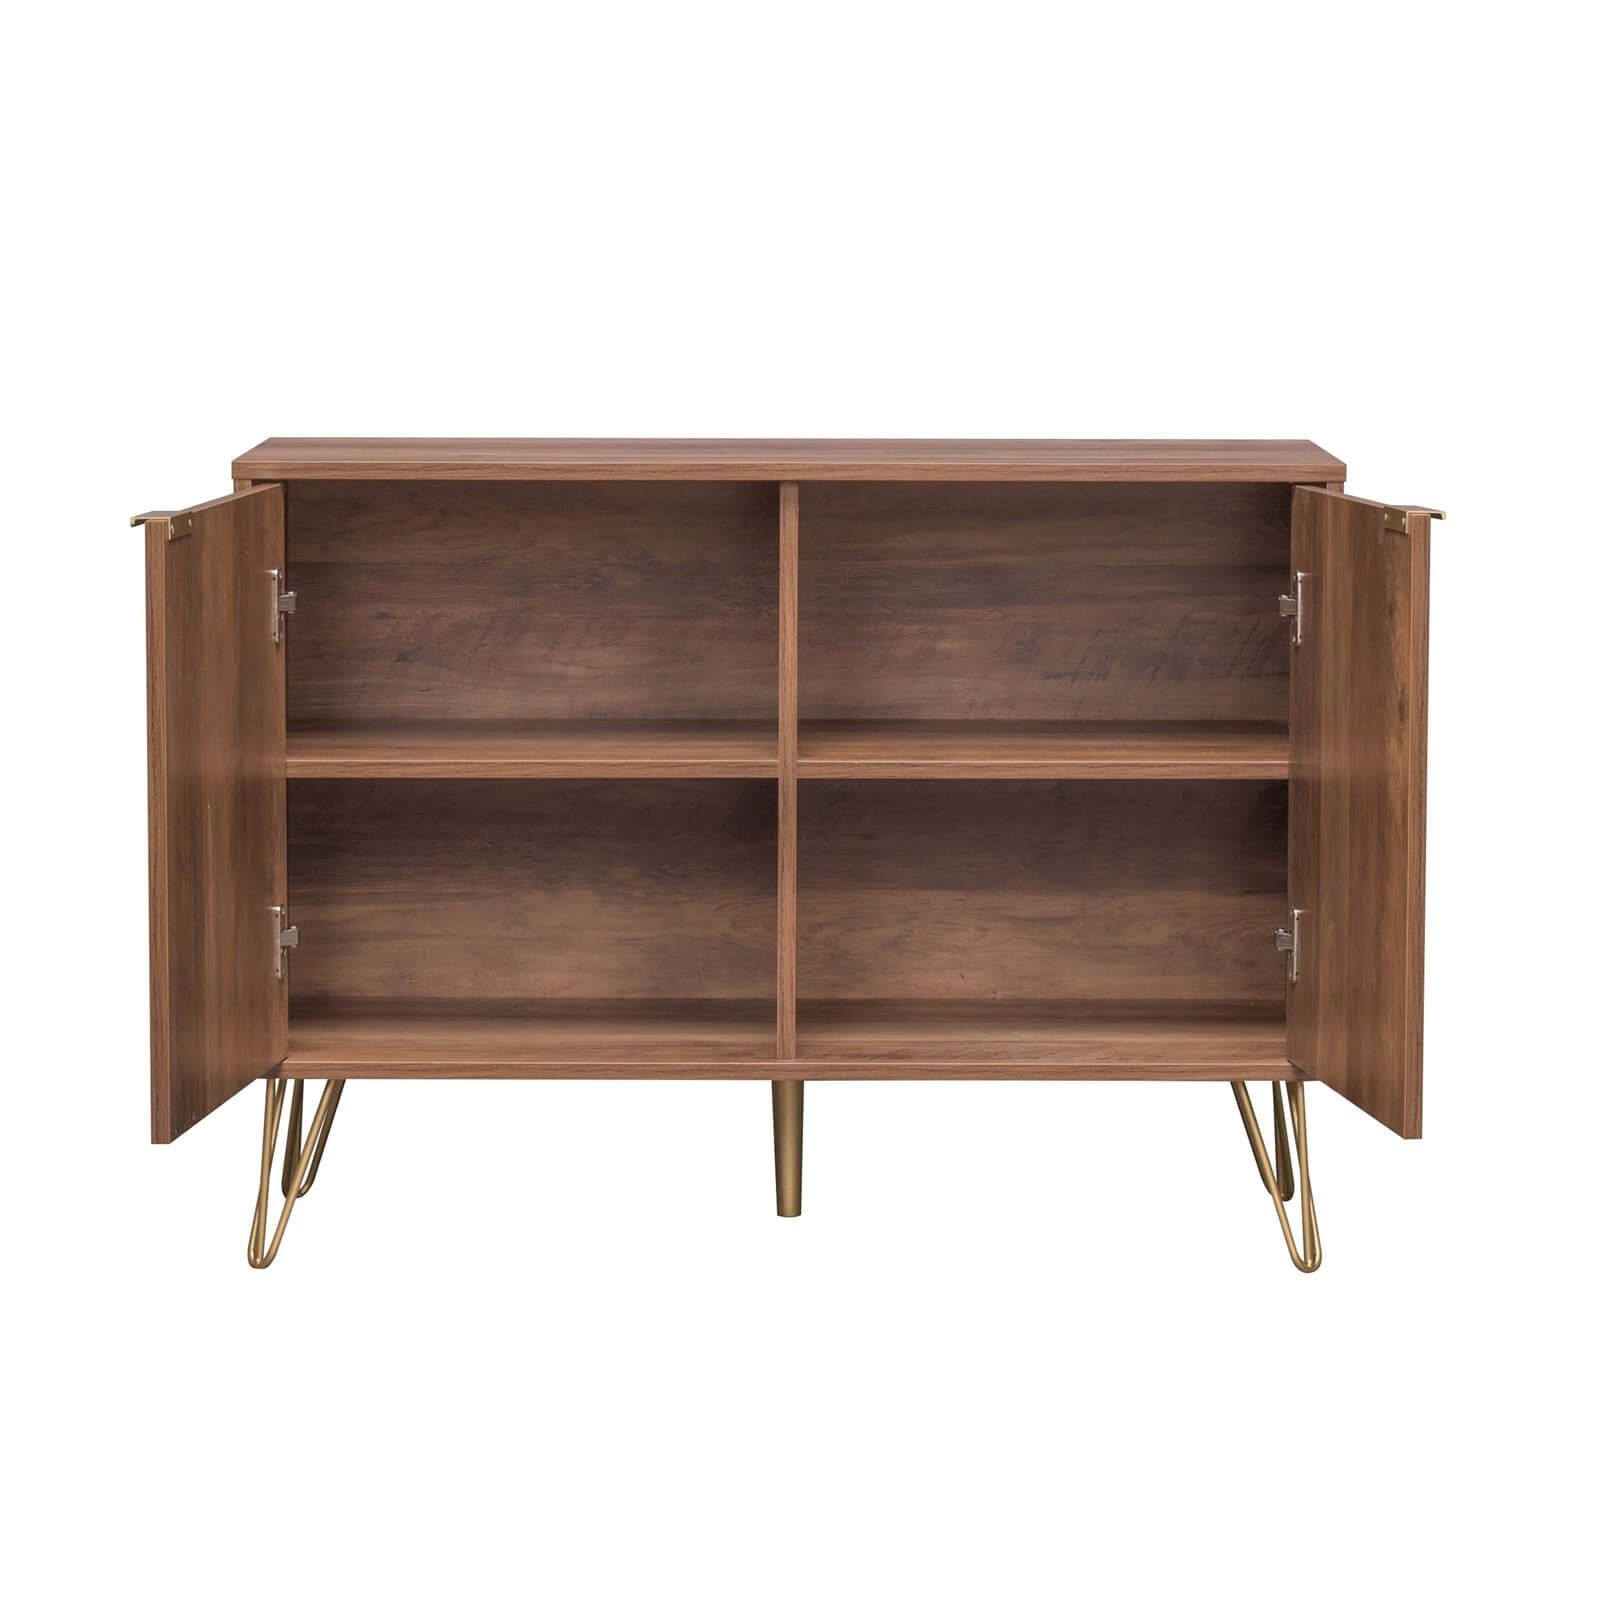 Vienna Sideboard - Wood Effect and Gold